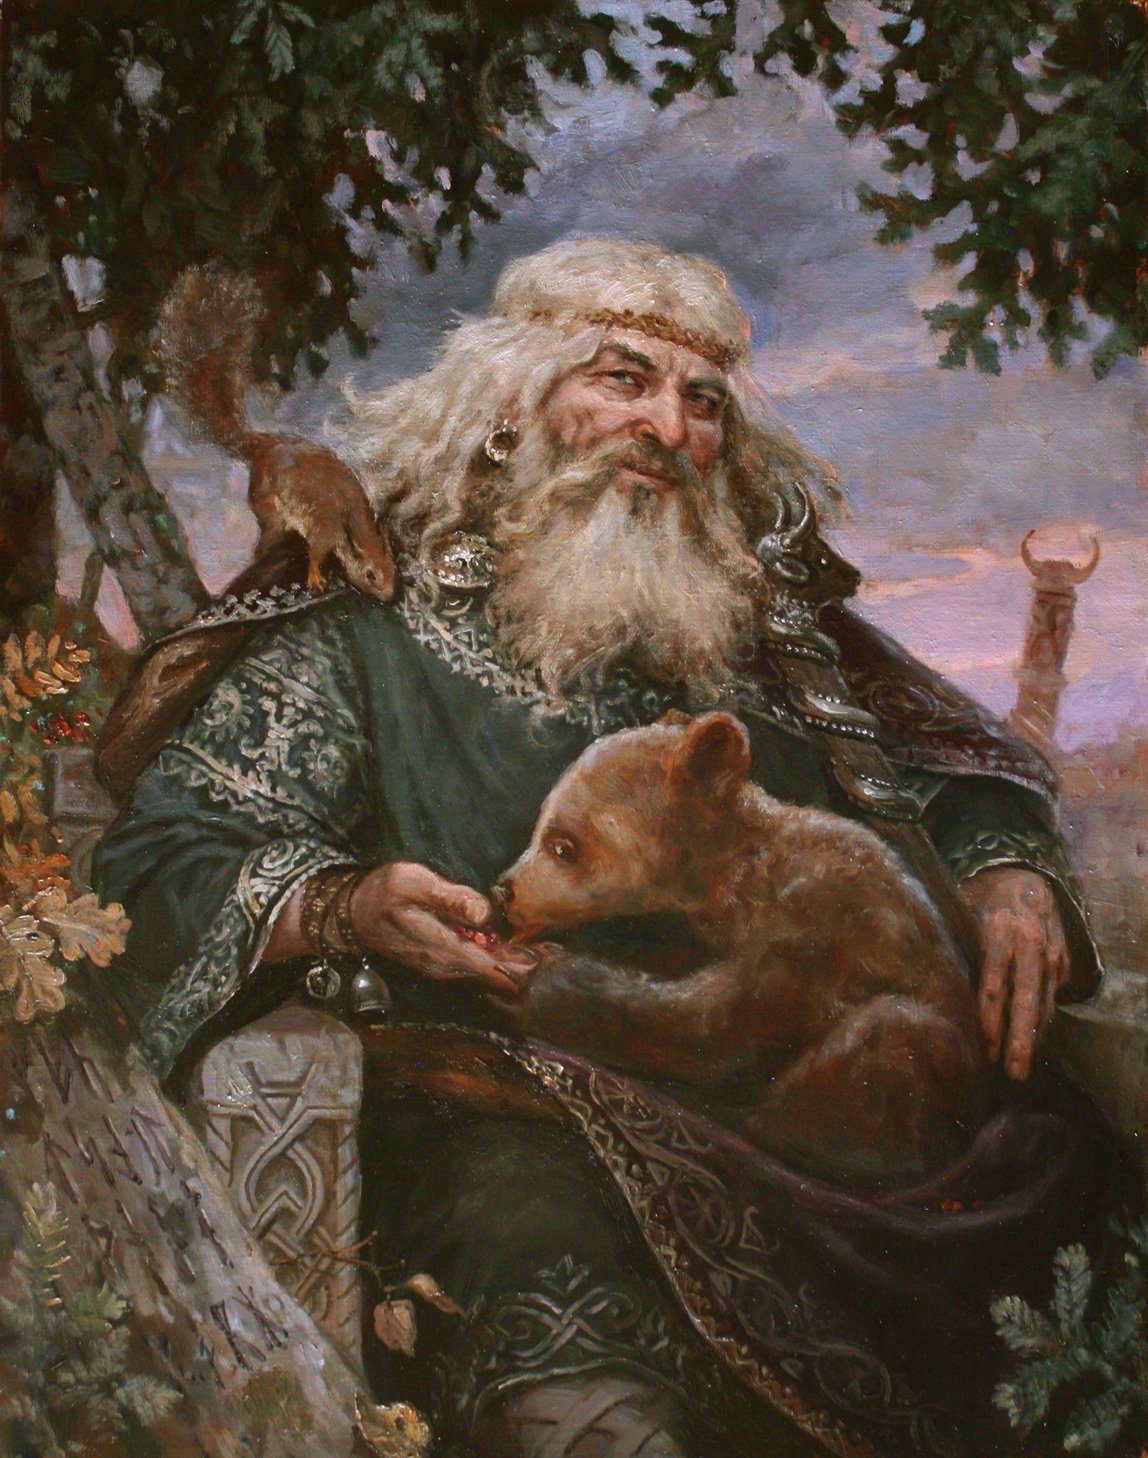 A painting of the Slavic god Veles. He is depicted as a elderly man with long gray hair, dressed in green Slavic garb. He is hand feeding a bear cub.